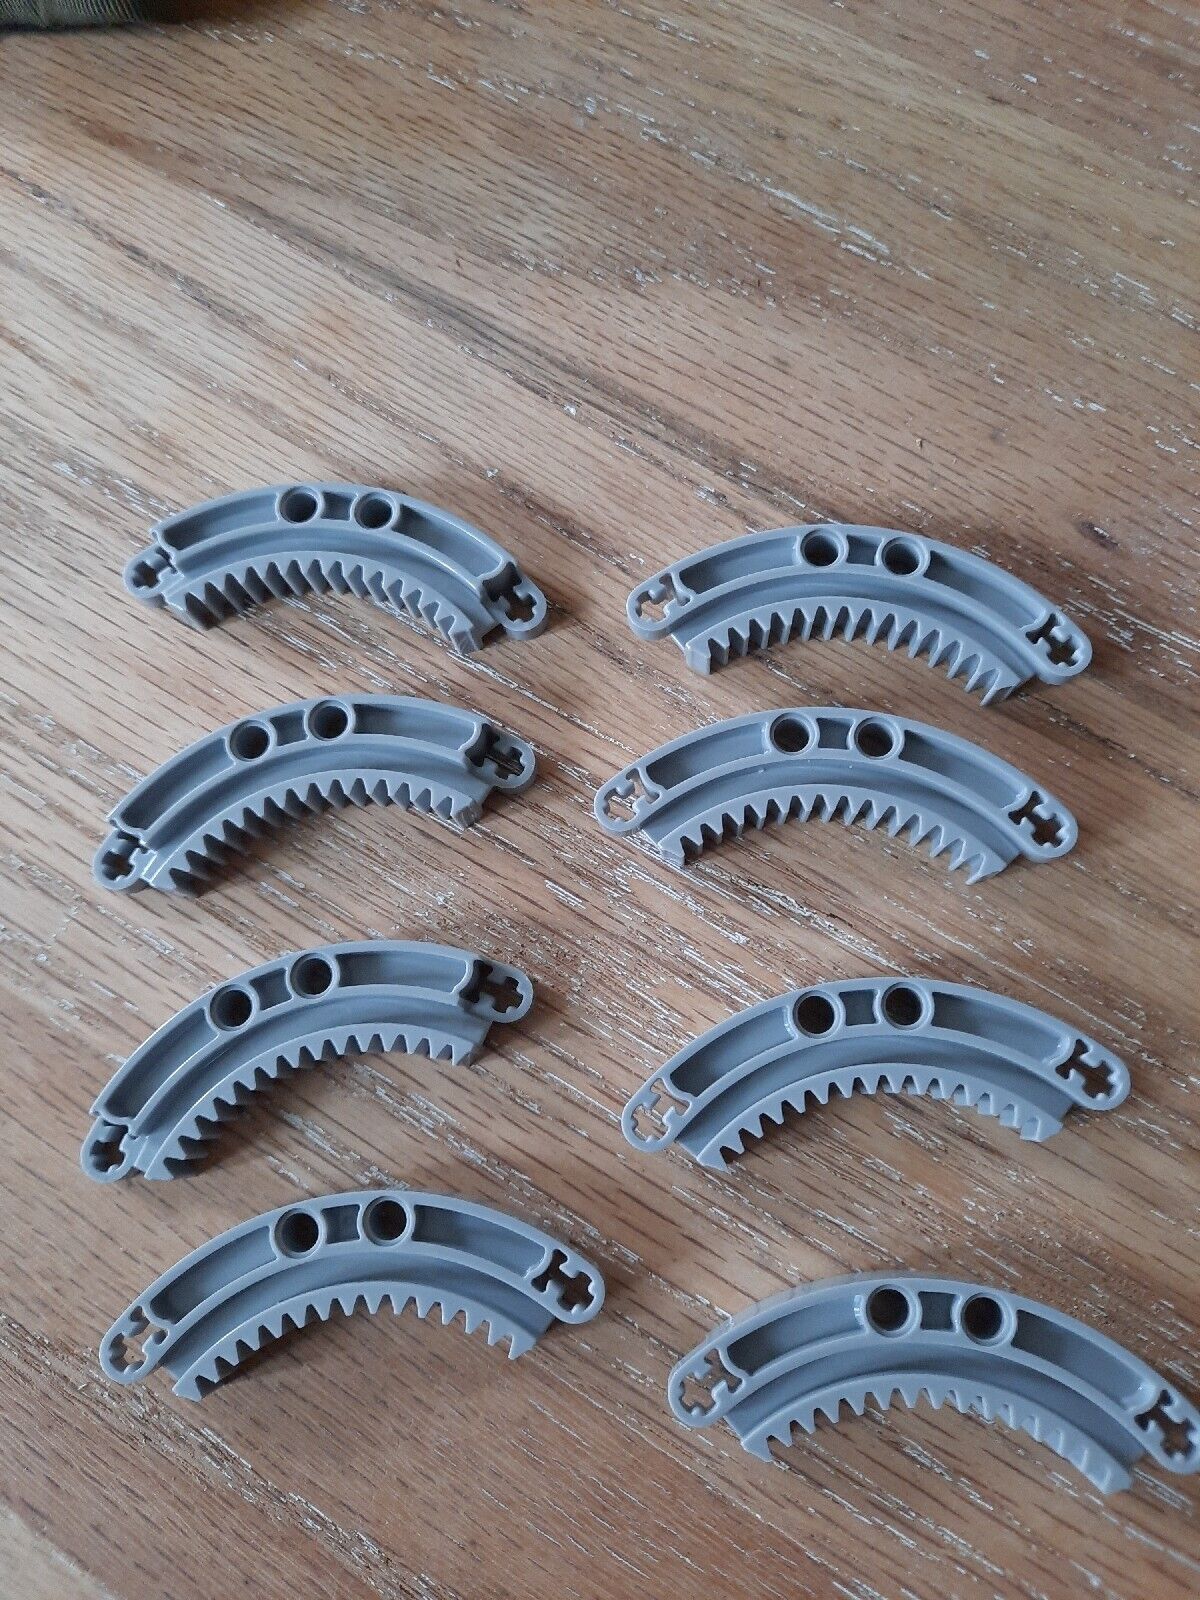 8 quarter circle gear rack 6x6 pieces from LEGO 75313 Star Wars UCS AT-AT